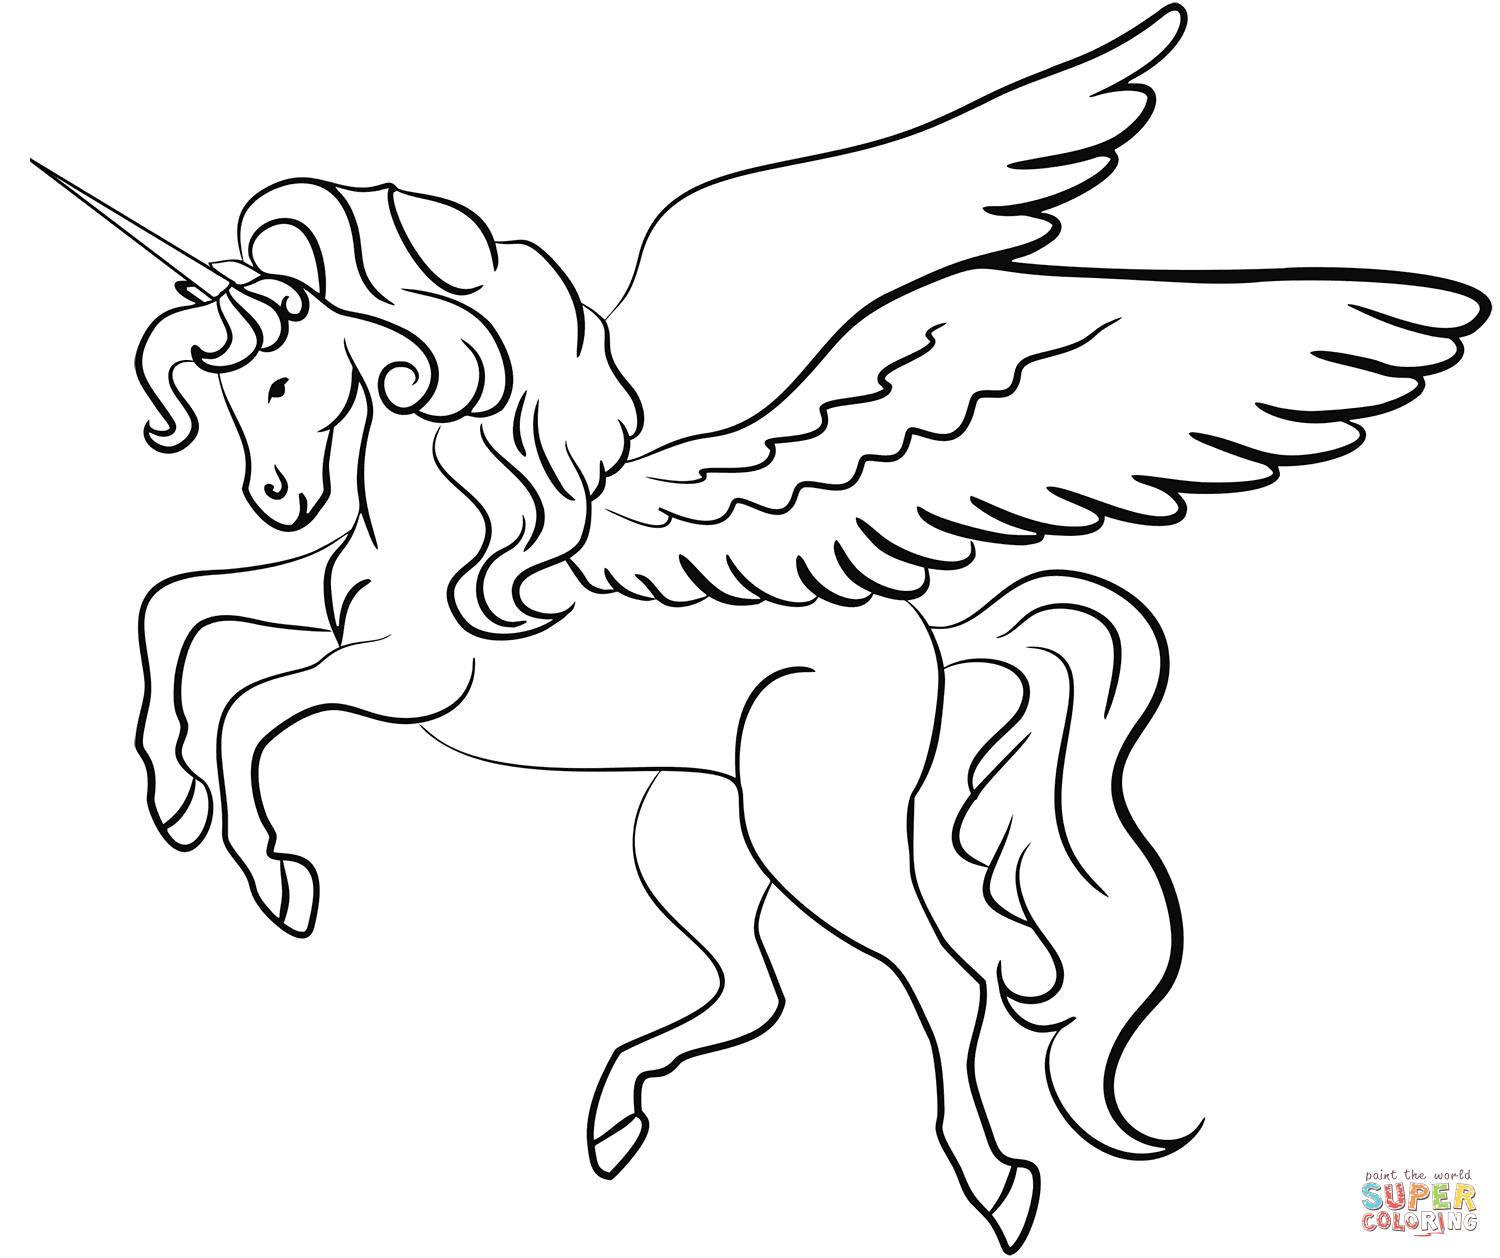 Unicorn Coloring Pages Online Winged Unicorn Coloring Page Free Printable Coloring Pages